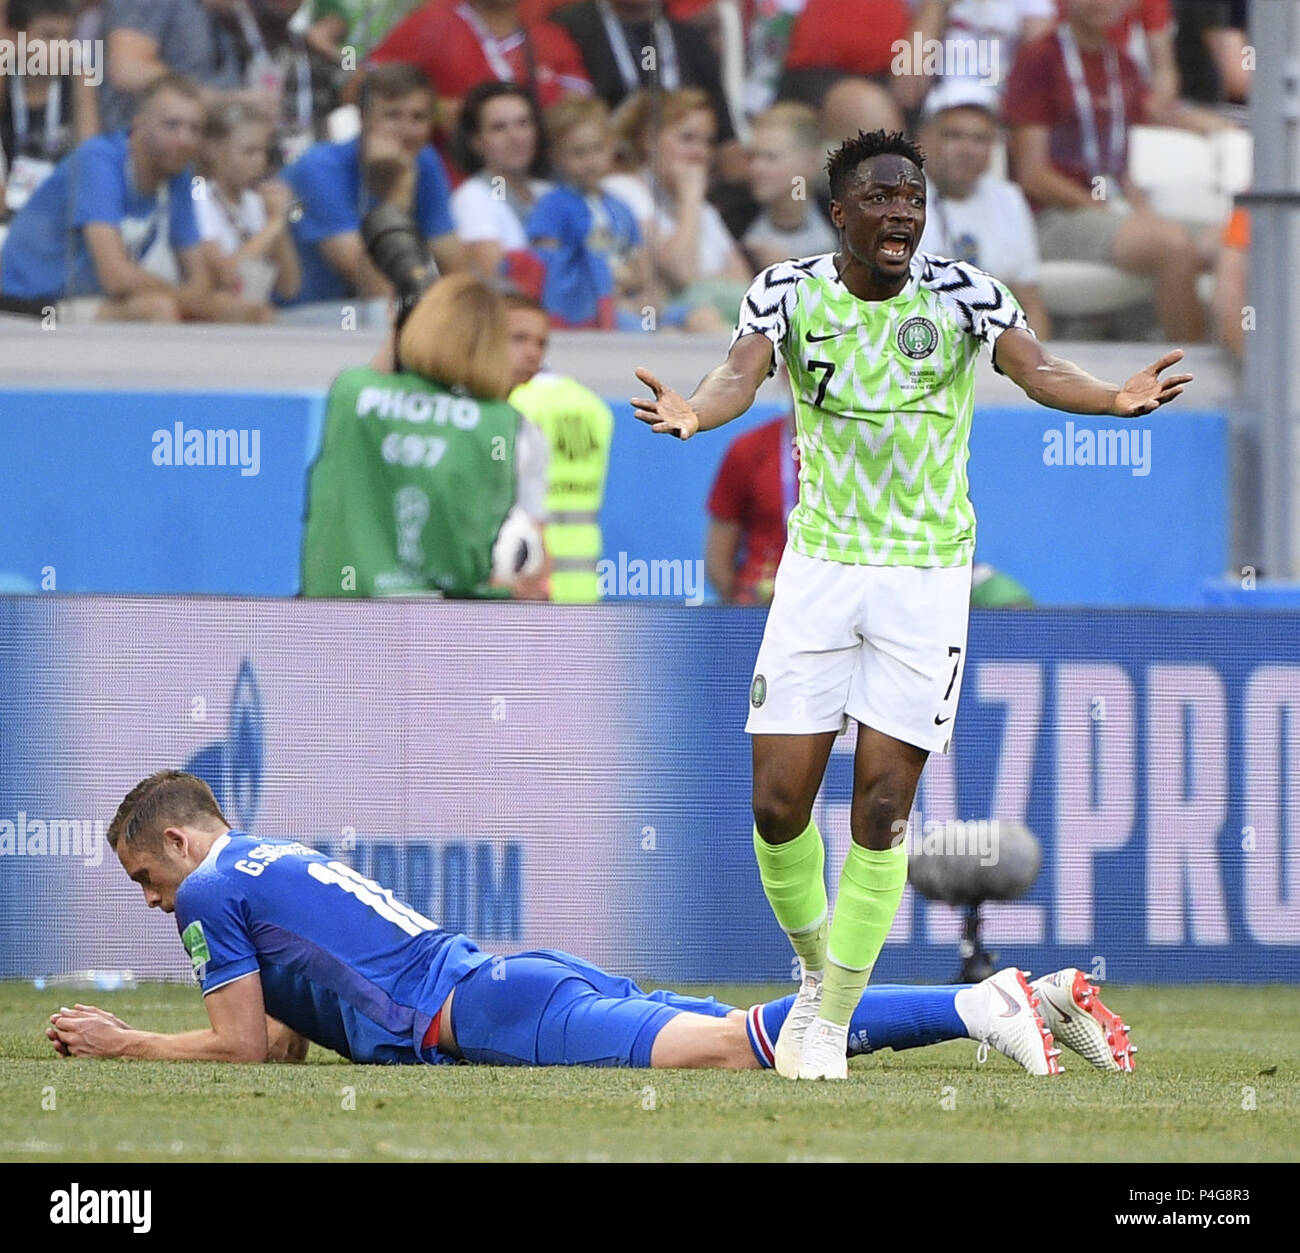 Volgograd, Russia. 22nd June, 2018. Ahmed Musa (R) of Nigeria reacts during the 2018 FIFA World Cup Group D match between Nigeria and Iceland in Volgograd, Russia, June 22, 2018. Credit: Lui Siu Wai/Xinhua/Alamy Live News Stock Photo